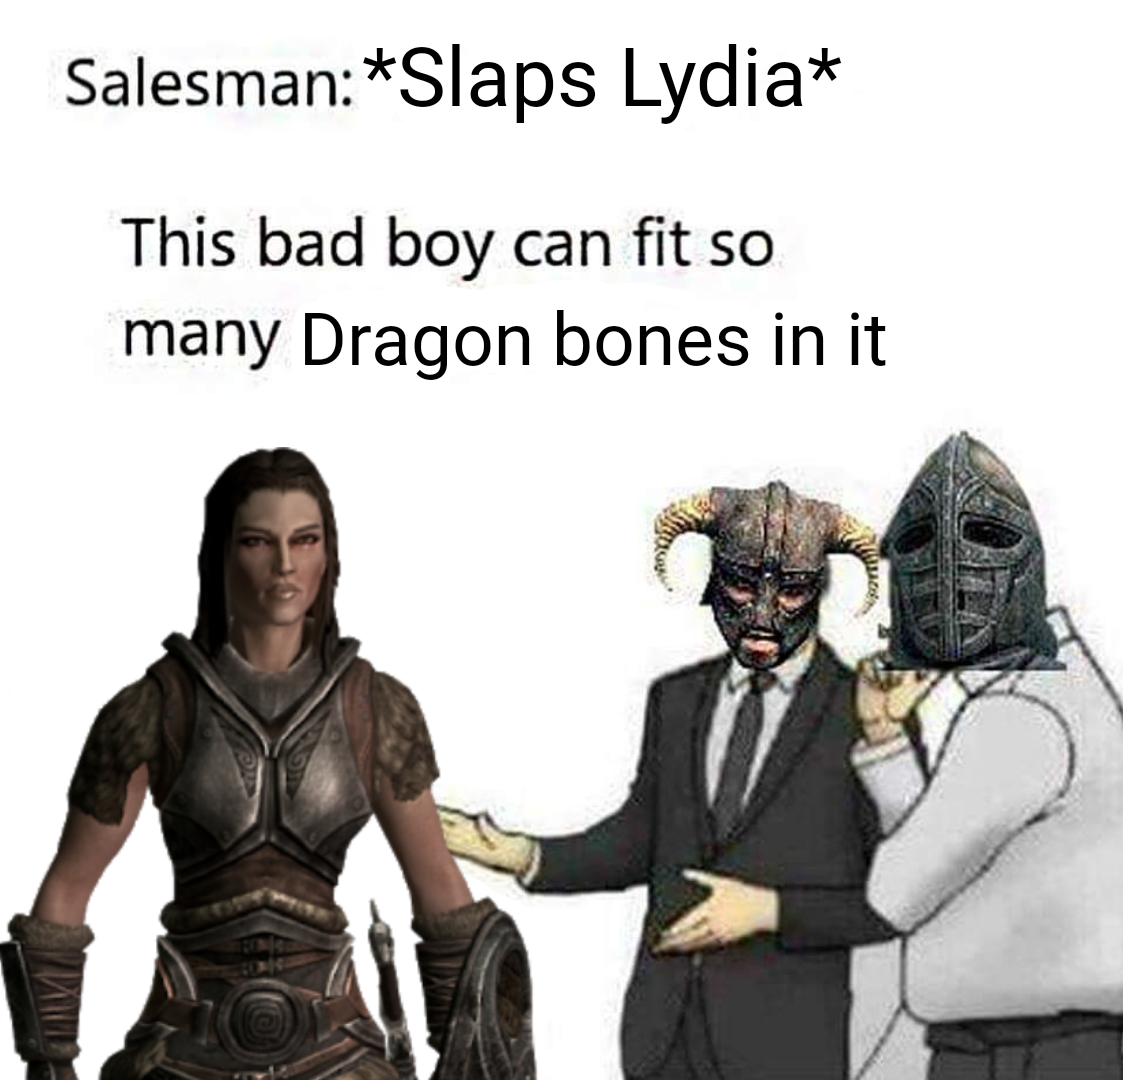 am sworn to carry your burdens - Salesman Slaps Lydia This bad boy can fit so many Dragon bones in it